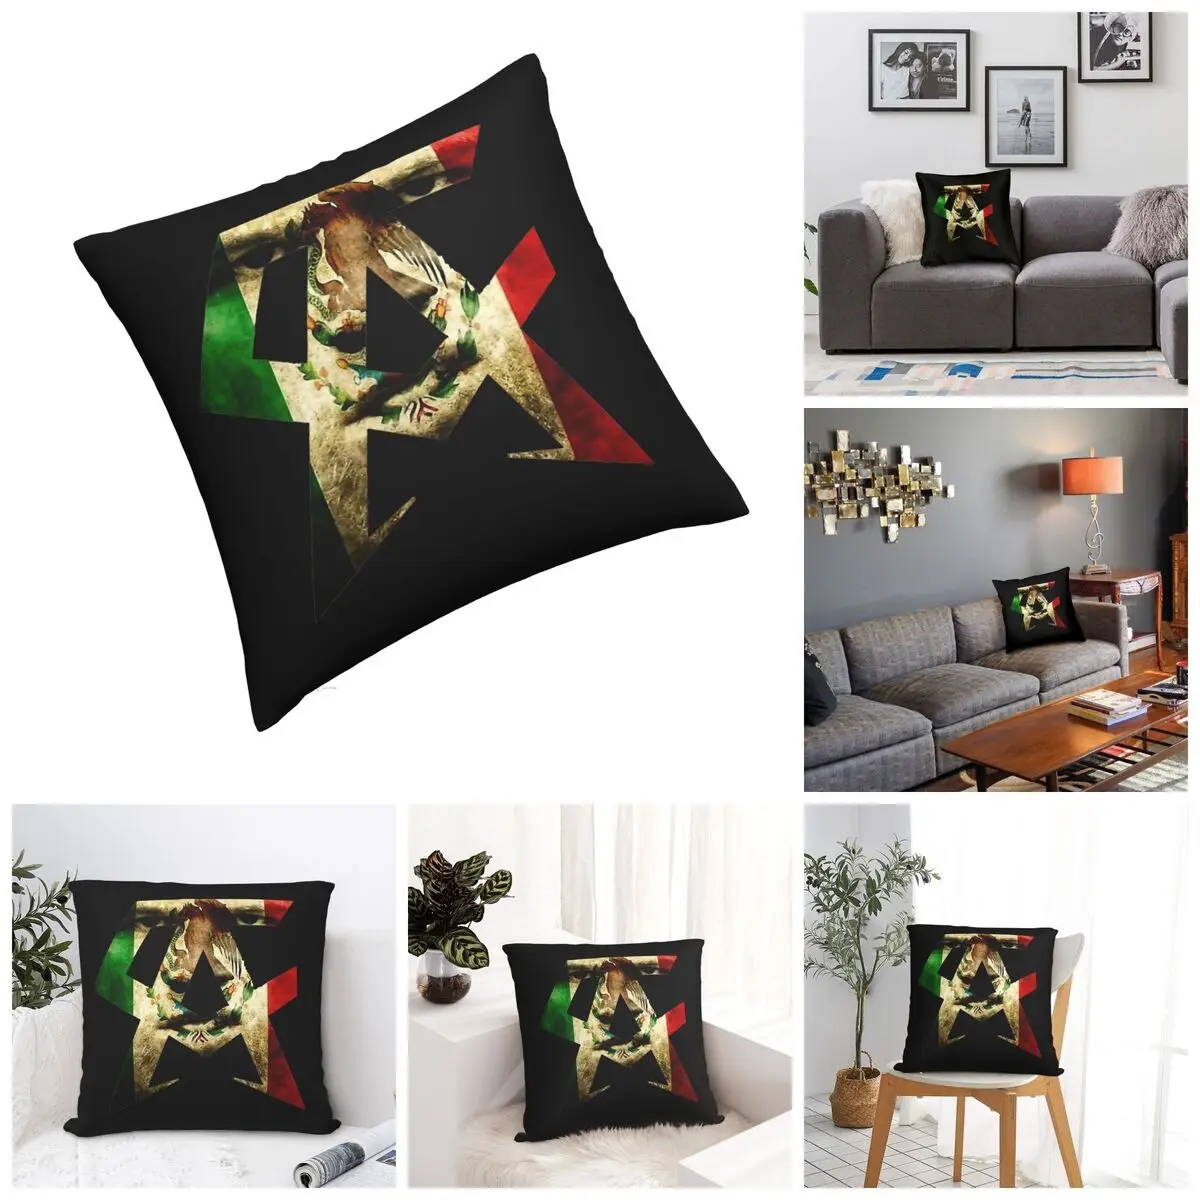 

Promo Canelos Alvarez Classic Essential Square Pillow Casual Graphic Weeping Willow Square Pillow Print Funny Novelty R257 Pad